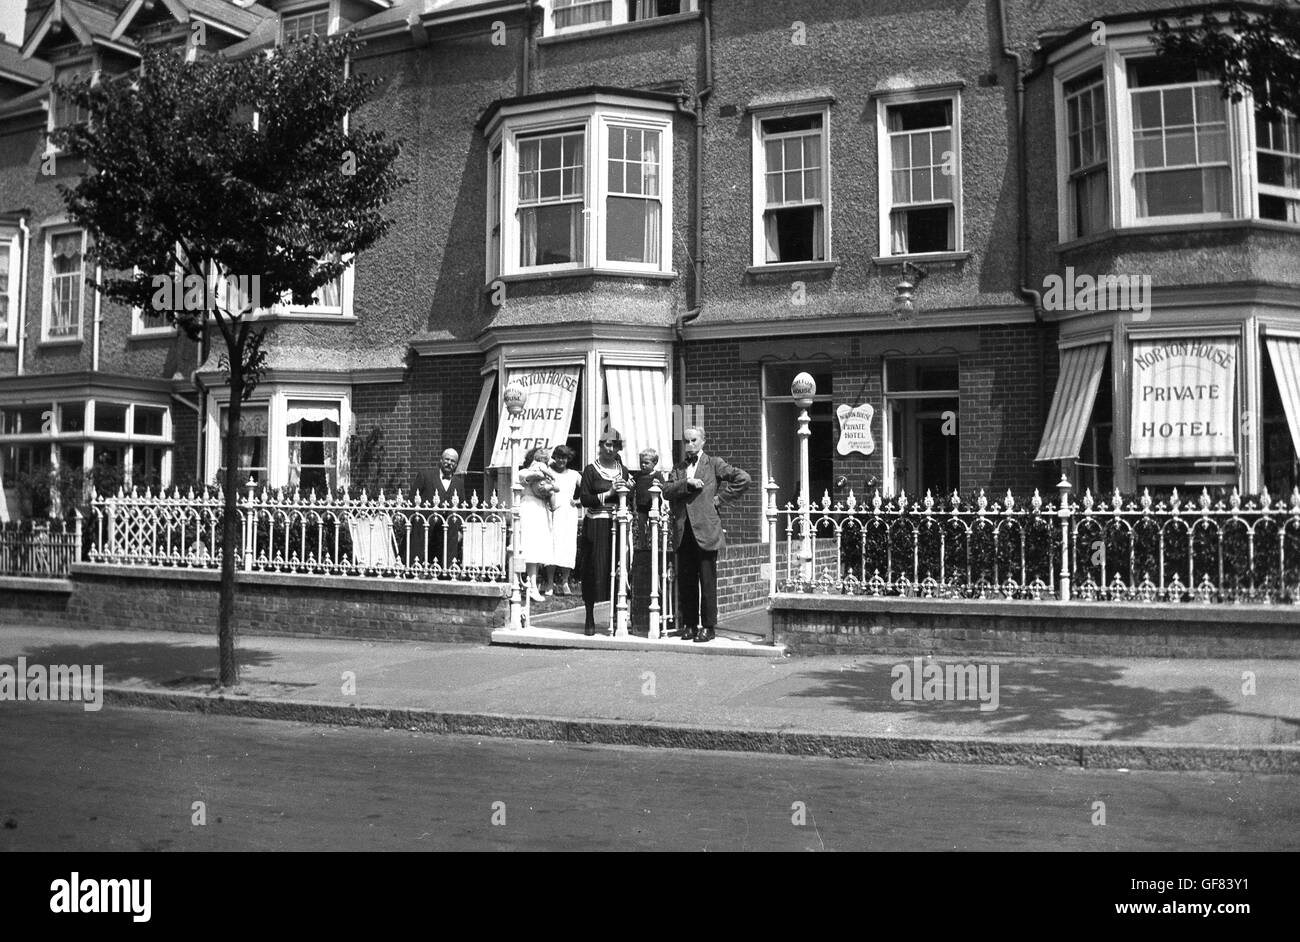 1930s, historical, Outside a  row of victorian terraced houses,, several guests standing at the entrance to Norton House, a privately owned and managed Hotel or boarding house in a urban street, England. Stock Photo